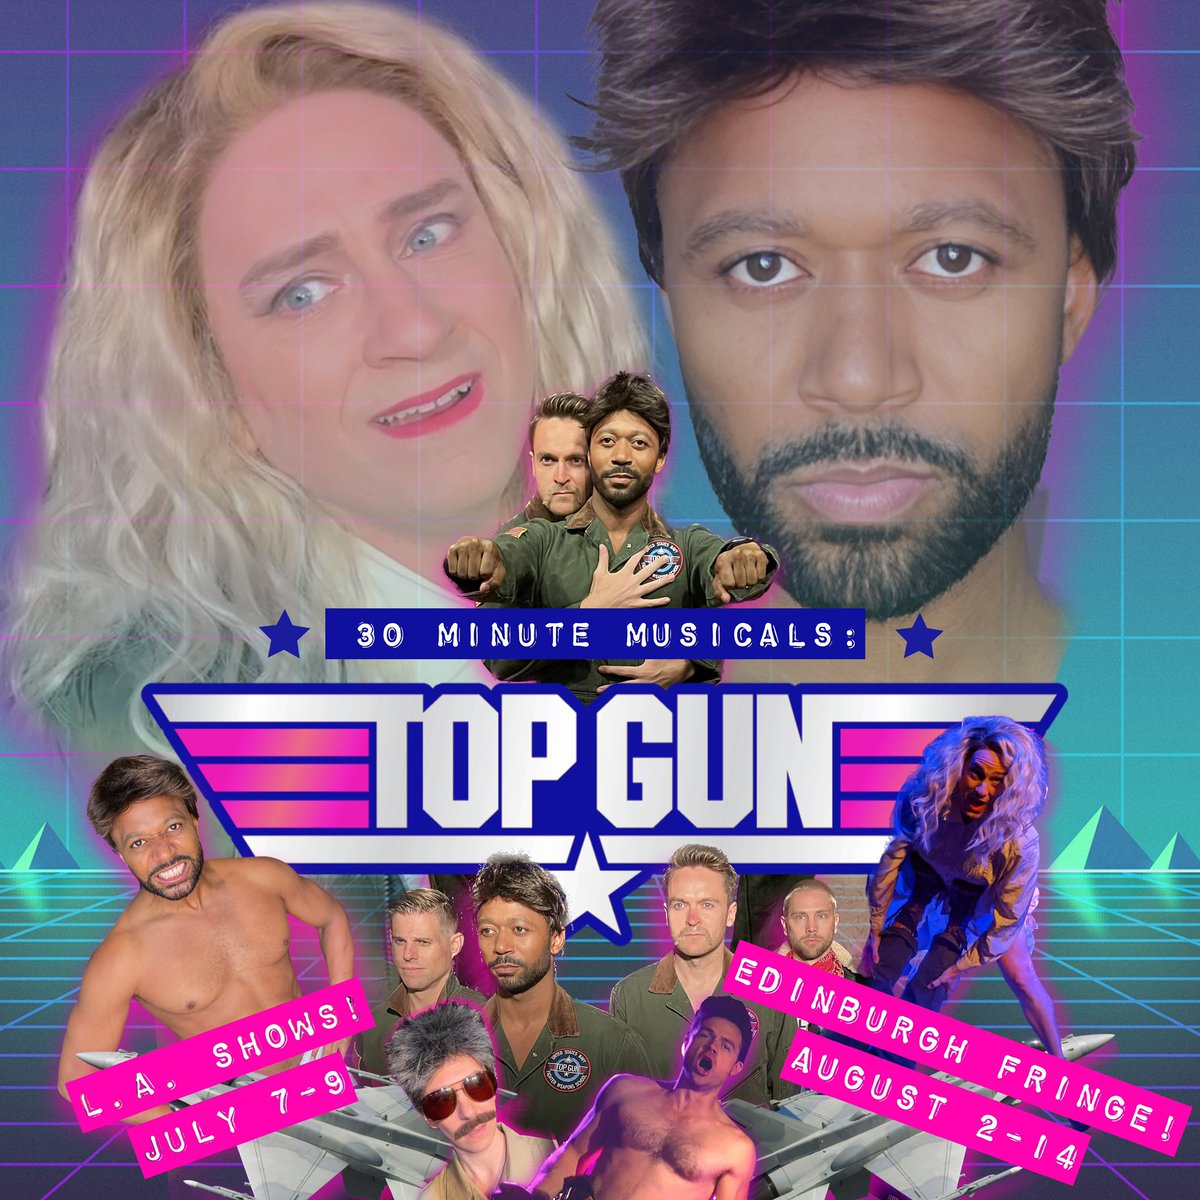 No points for second place! @edfringe @AssemblyFest @30_MM TOP GUN is flying into the festival Aug 2 - 14! Come get real stoopid with us! assemblyfestival.com/whats-on/30-mi…